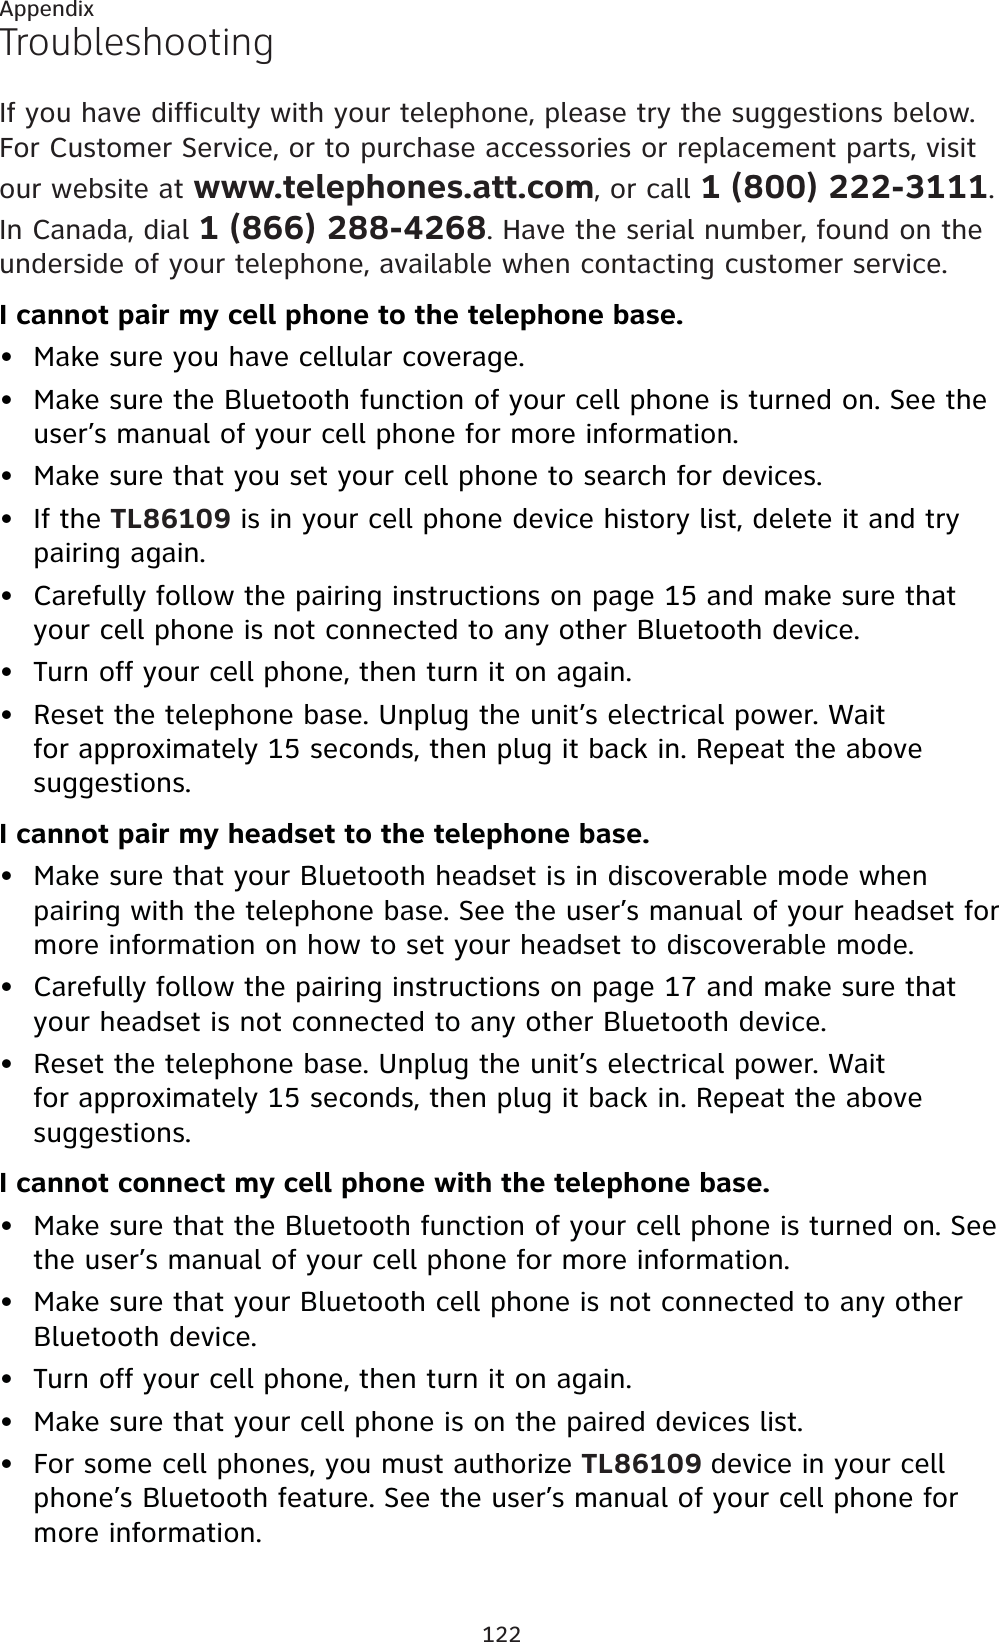 122AppendixTroubleshootingIf you have difficulty with your telephone, please try the suggestions below. For Customer Service, or to purchase accessories or replacement parts, visit our website at www.telephones.att.com, or call 1 (800) 222-3111.In Canada, dial 1 (866) 288-4268. Have the serial number, found on the underside of your telephone, available when contacting customer service.I cannot pair my cell phone to the telephone base.Make sure you have cellular coverage.Make sure the Bluetooth function of your cell phone is turned on. See the user’s manual of your cell phone for more information.Make sure that you set your cell phone to search for devices.If the TL86109 is in your cell phone device history list, delete it and try pairing again.Carefully follow the pairing instructions on page 15 and make sure that your cell phone is not connected to any other Bluetooth device.Turn off your cell phone, then turn it on again.Reset the telephone base. Unplug the unit’s electrical power. Wait for approximately 15 seconds, then plug it back in. Repeat the above suggestions.I cannot pair my headset to the telephone base.Make sure that your Bluetooth headset is in discoverable mode when pairing with the telephone base. See the user’s manual of your headset for more information on how to set your headset to discoverable mode.Carefully follow the pairing instructions on page 17 and make sure that your headset is not connected to any other Bluetooth device.Reset the telephone base. Unplug the unit’s electrical power. Wait for approximately 15 seconds, then plug it back in. Repeat the above suggestions.I cannot connect my cell phone with the telephone base.Make sure that the Bluetooth function of your cell phone is turned on. See the user’s manual of your cell phone for more information.Make sure that your Bluetooth cell phone is not connected to any other Bluetooth device.Turn off your cell phone, then turn it on again.Make sure that your cell phone is on the paired devices list.For some cell phones, you must authorize TL86109 device in your cell phone’s Bluetooth feature. See the user’s manual of your cell phone for more information.•••••••••••••••